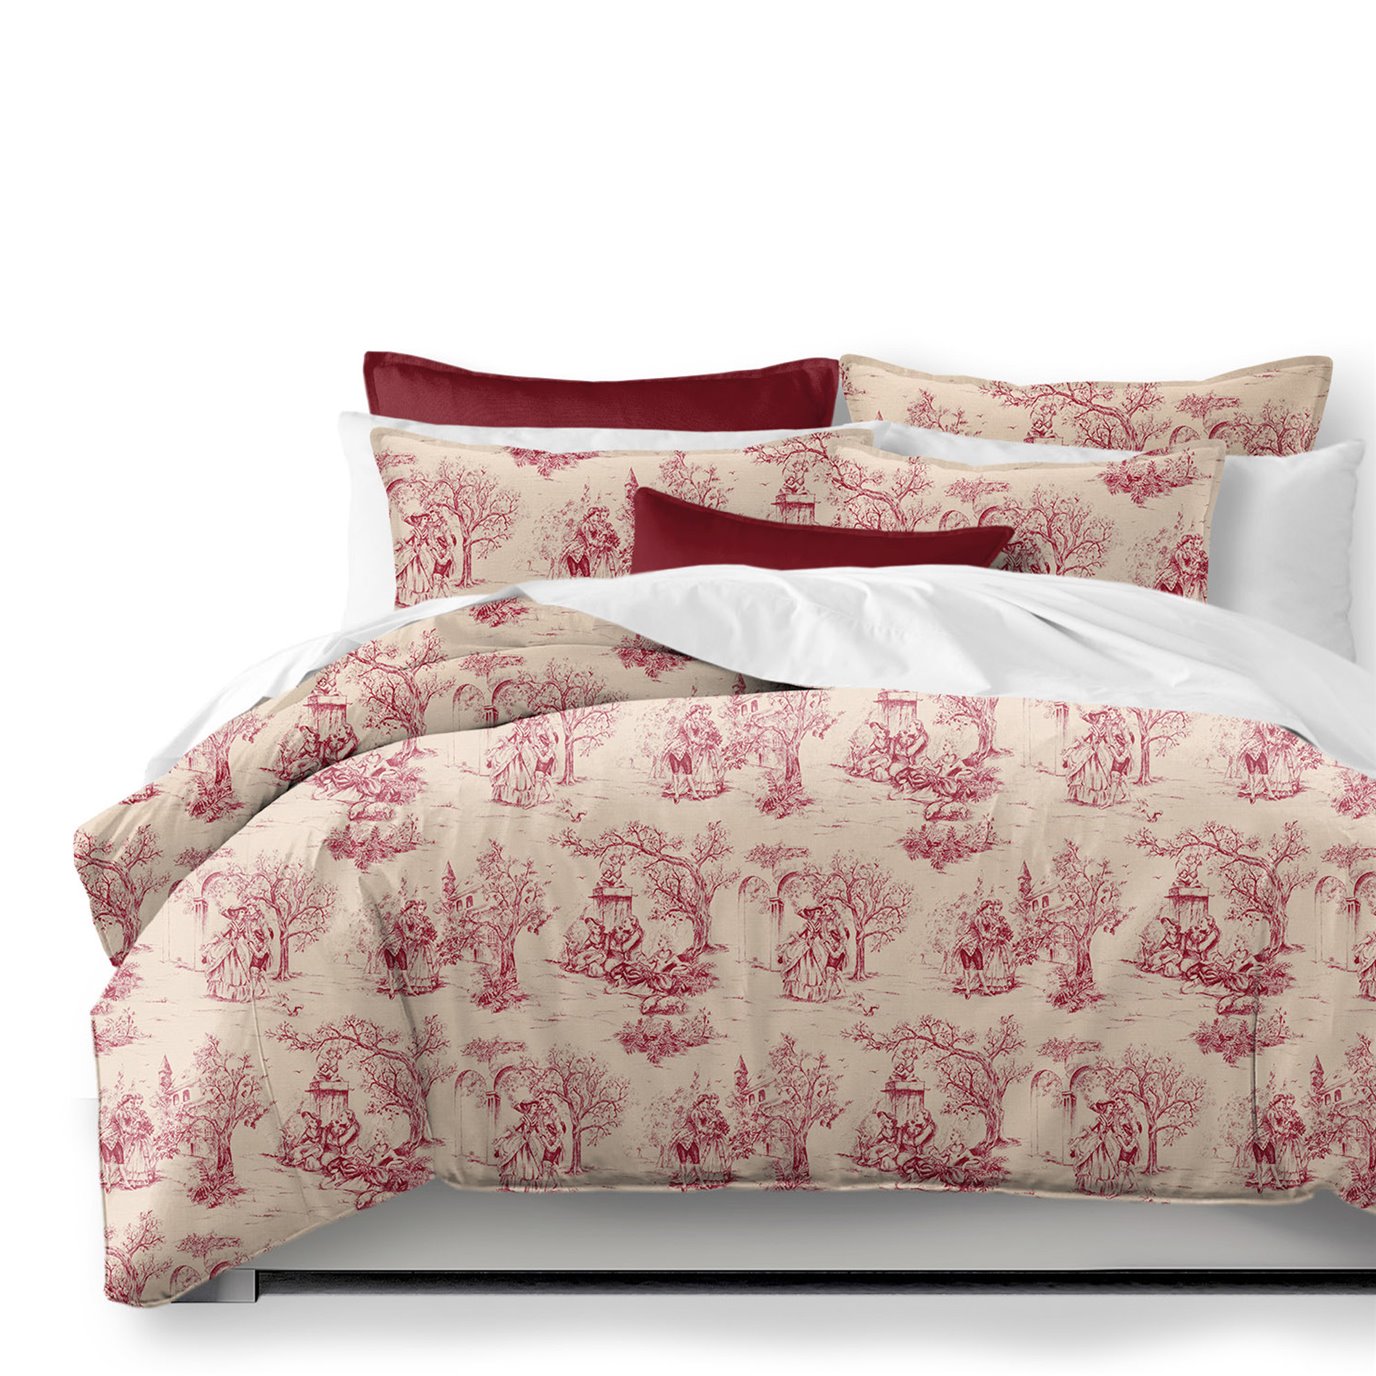 Archamps Toile Red Coverlet and Pillow Sham(s) Set - Size Super Queen